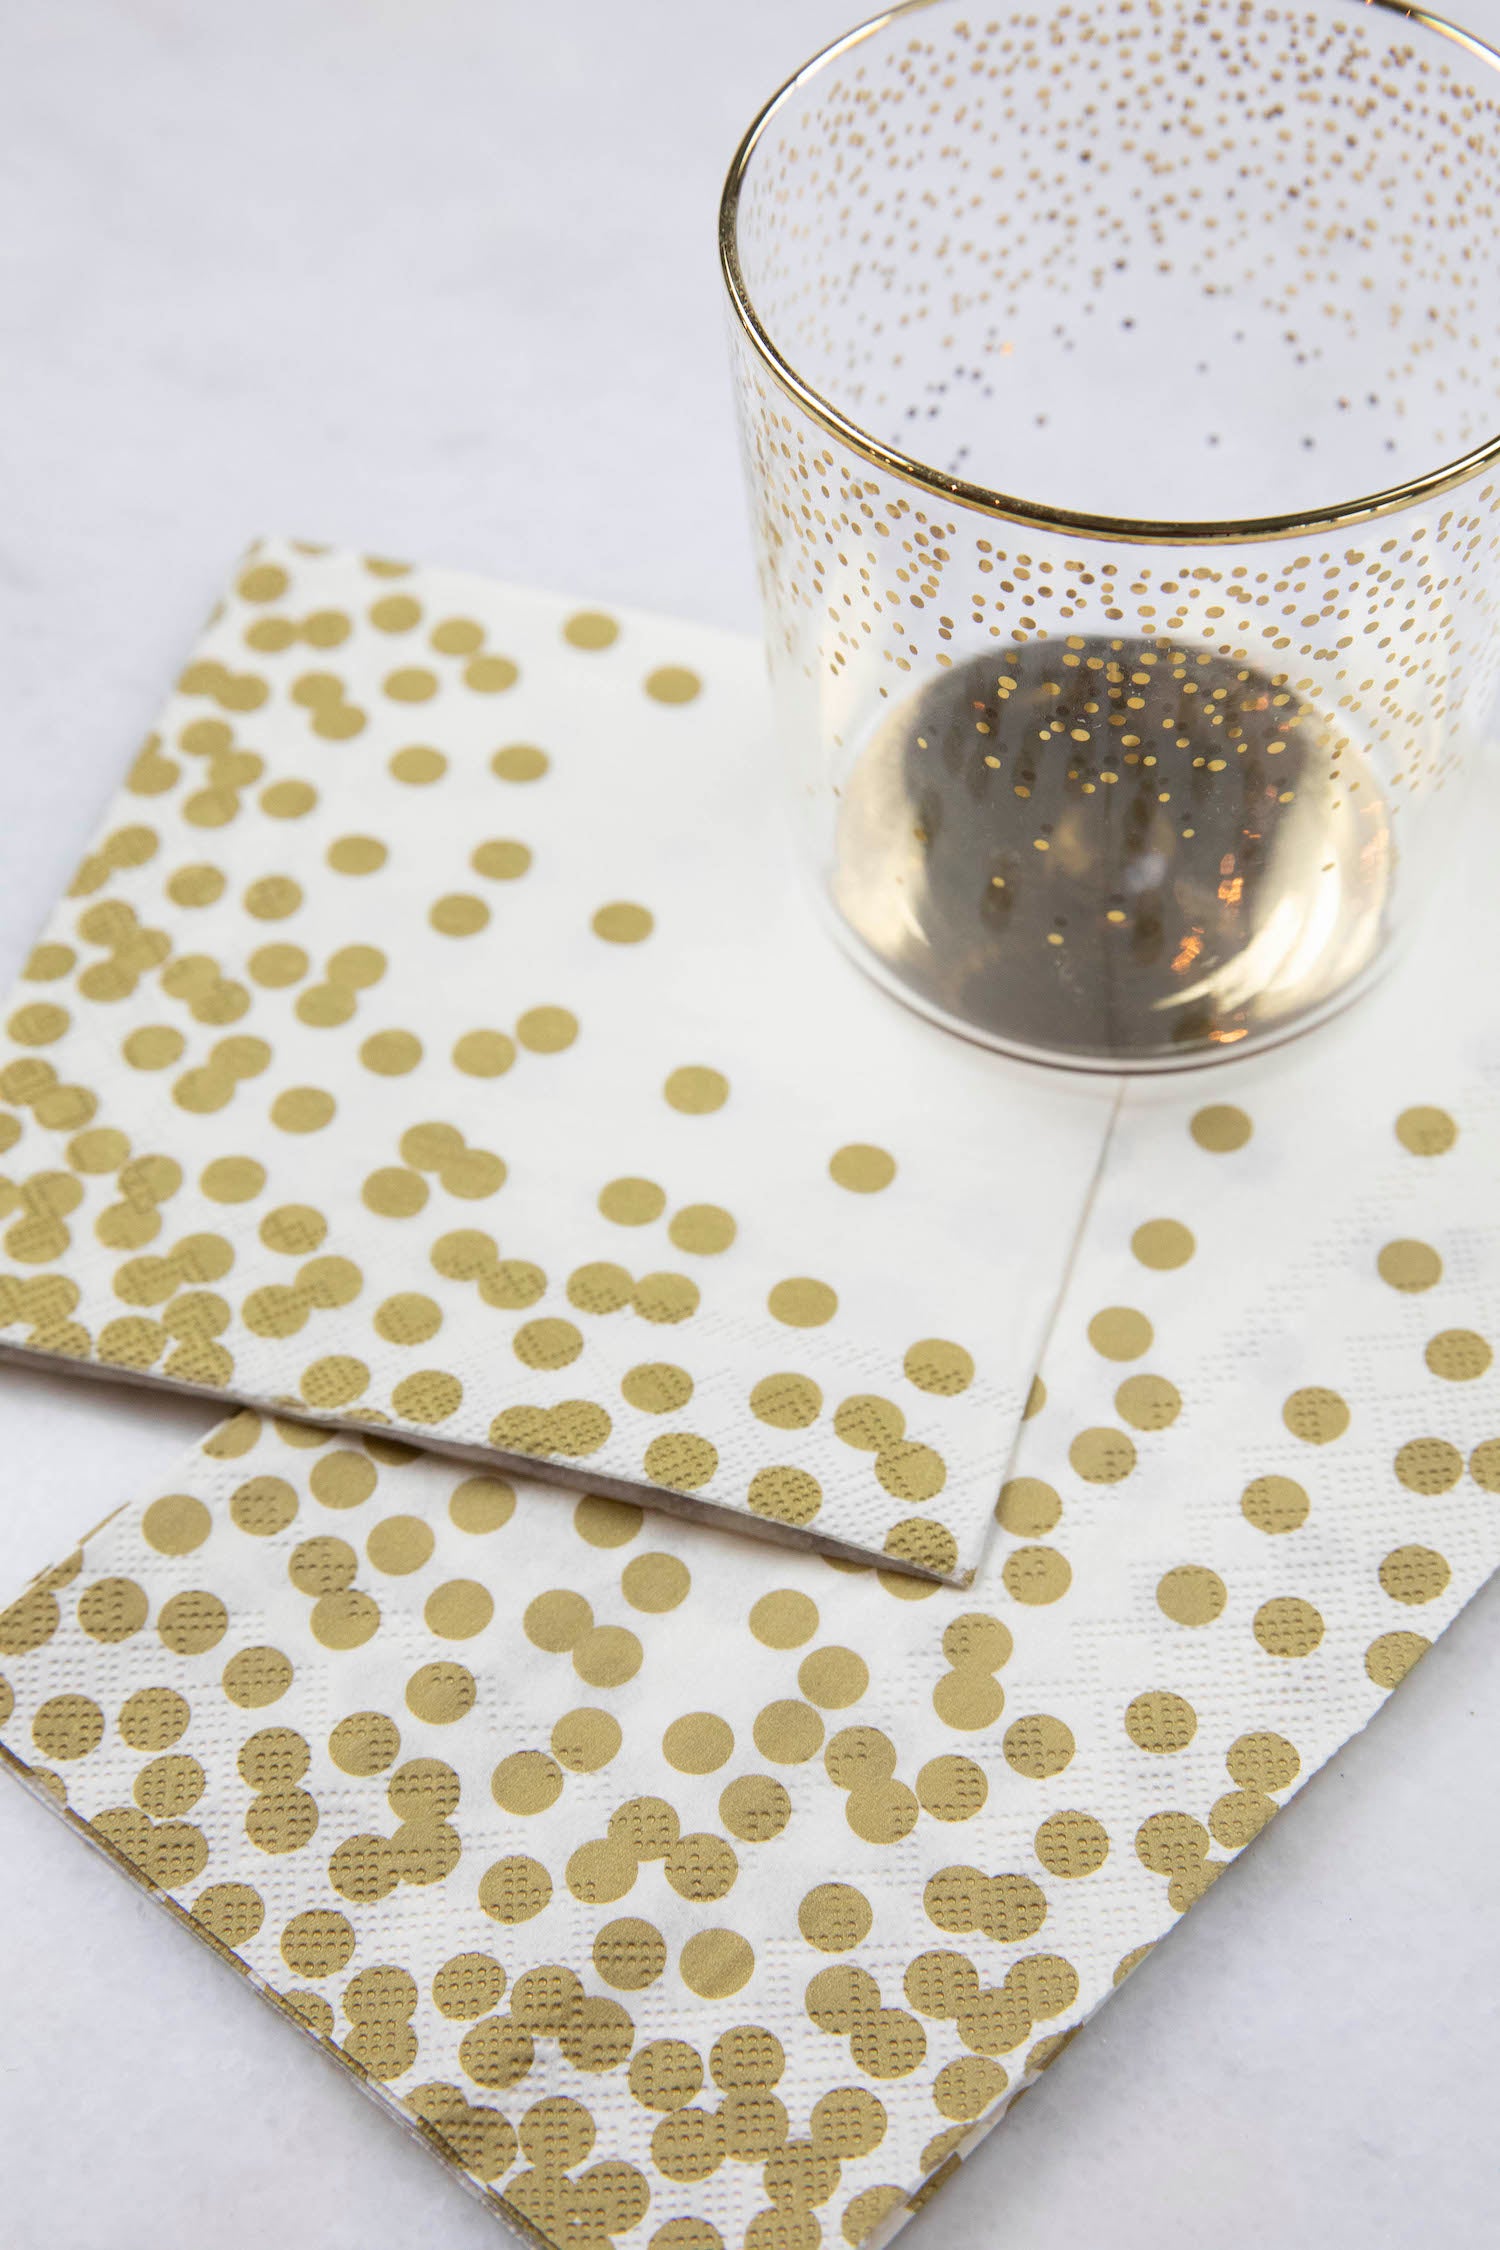 Two Gold Confetti Napkins, one Cocktail and one Guest, under a gold-accented glass on a white table.